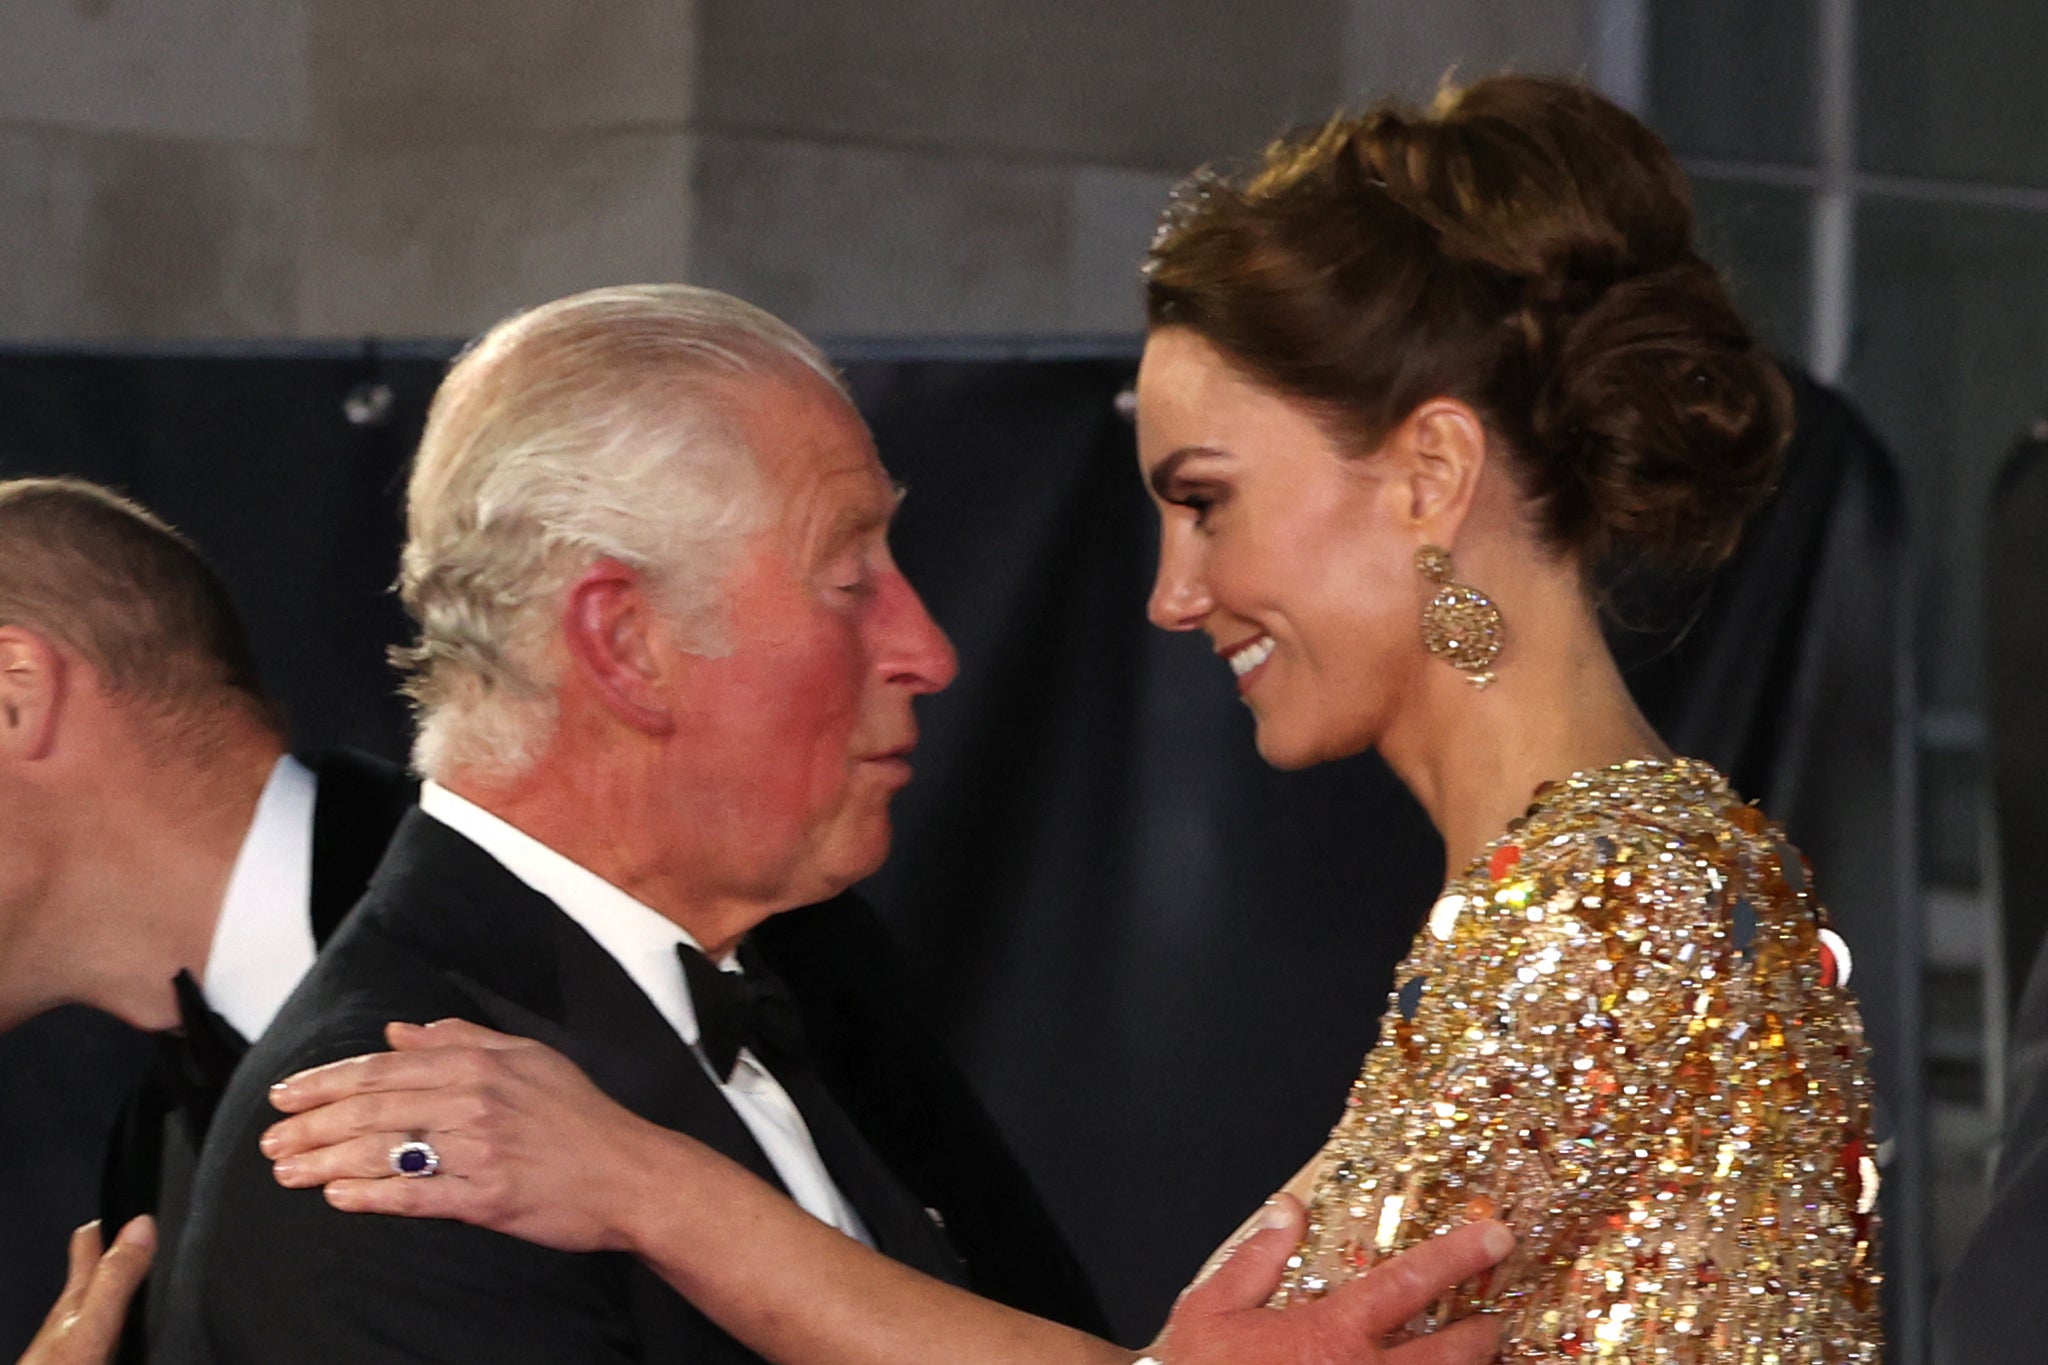 King Charles and the Princess of Wales have both cancelled public duties with both announcing health issues